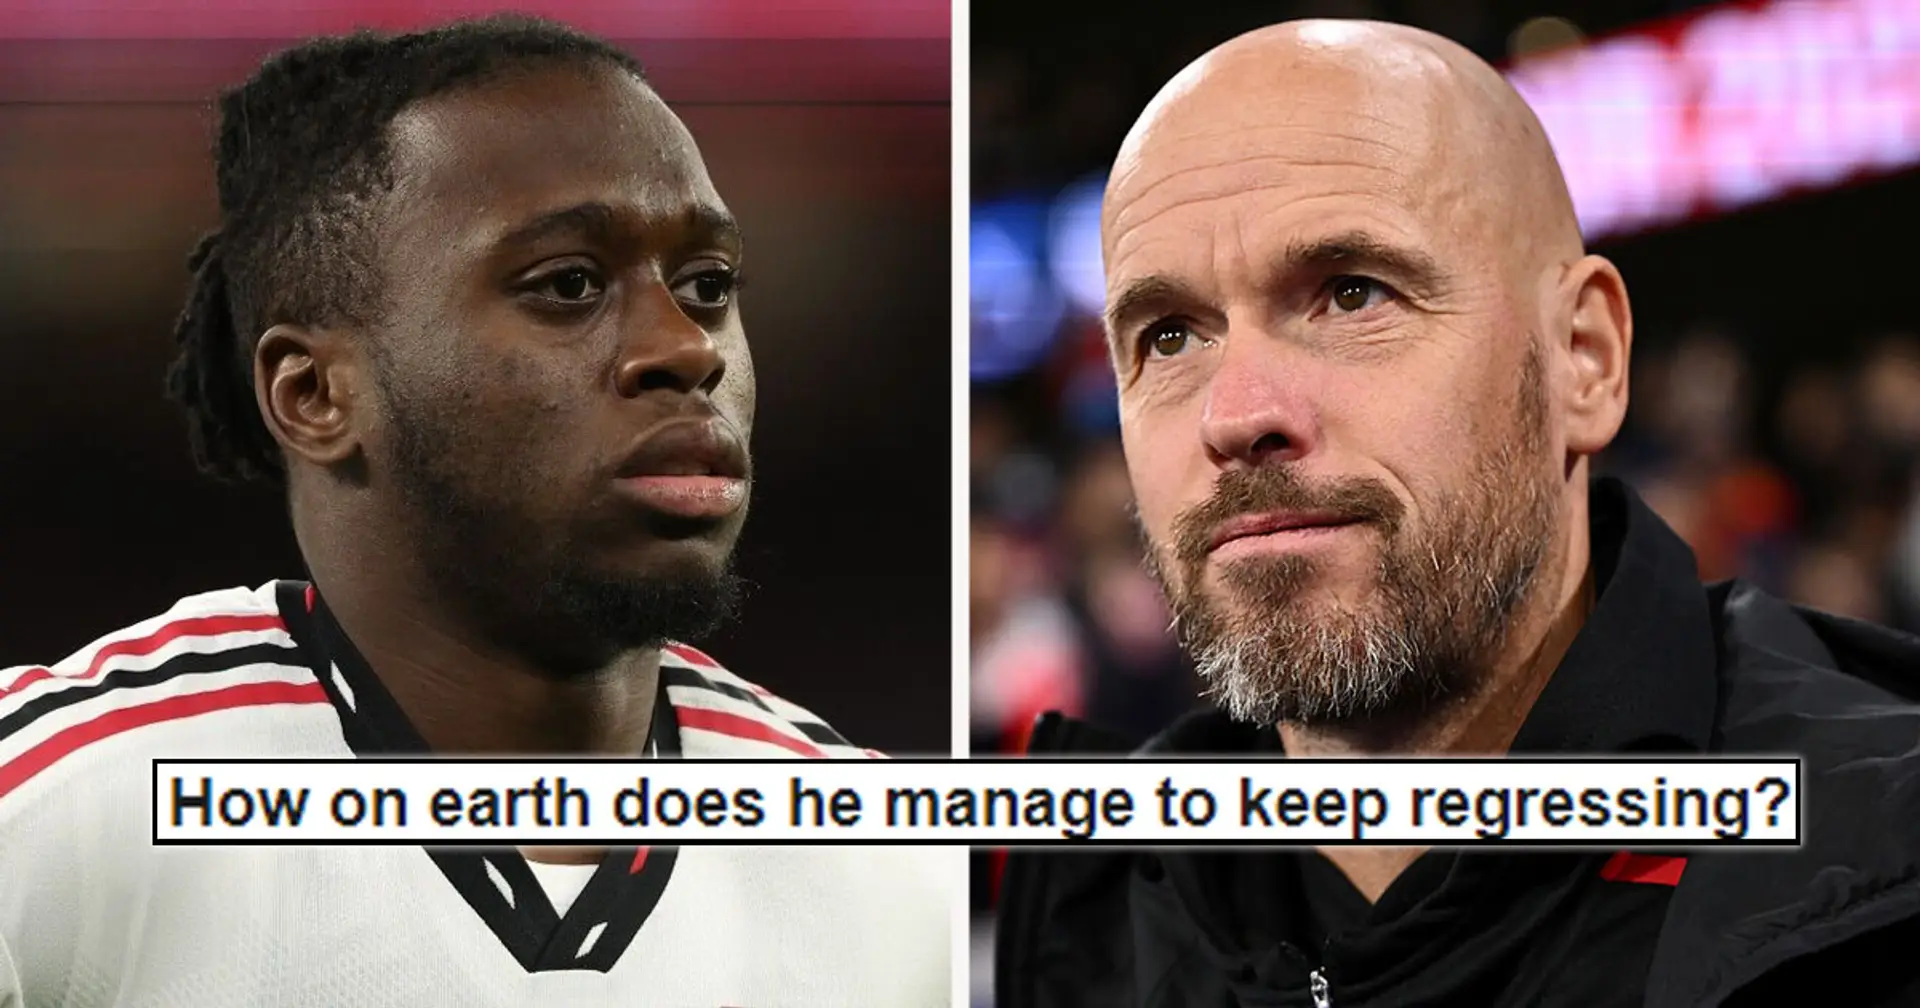 'He's playing his way out of the club': Man United fans disappointed with Wan-Bissaka's outings in pre-season